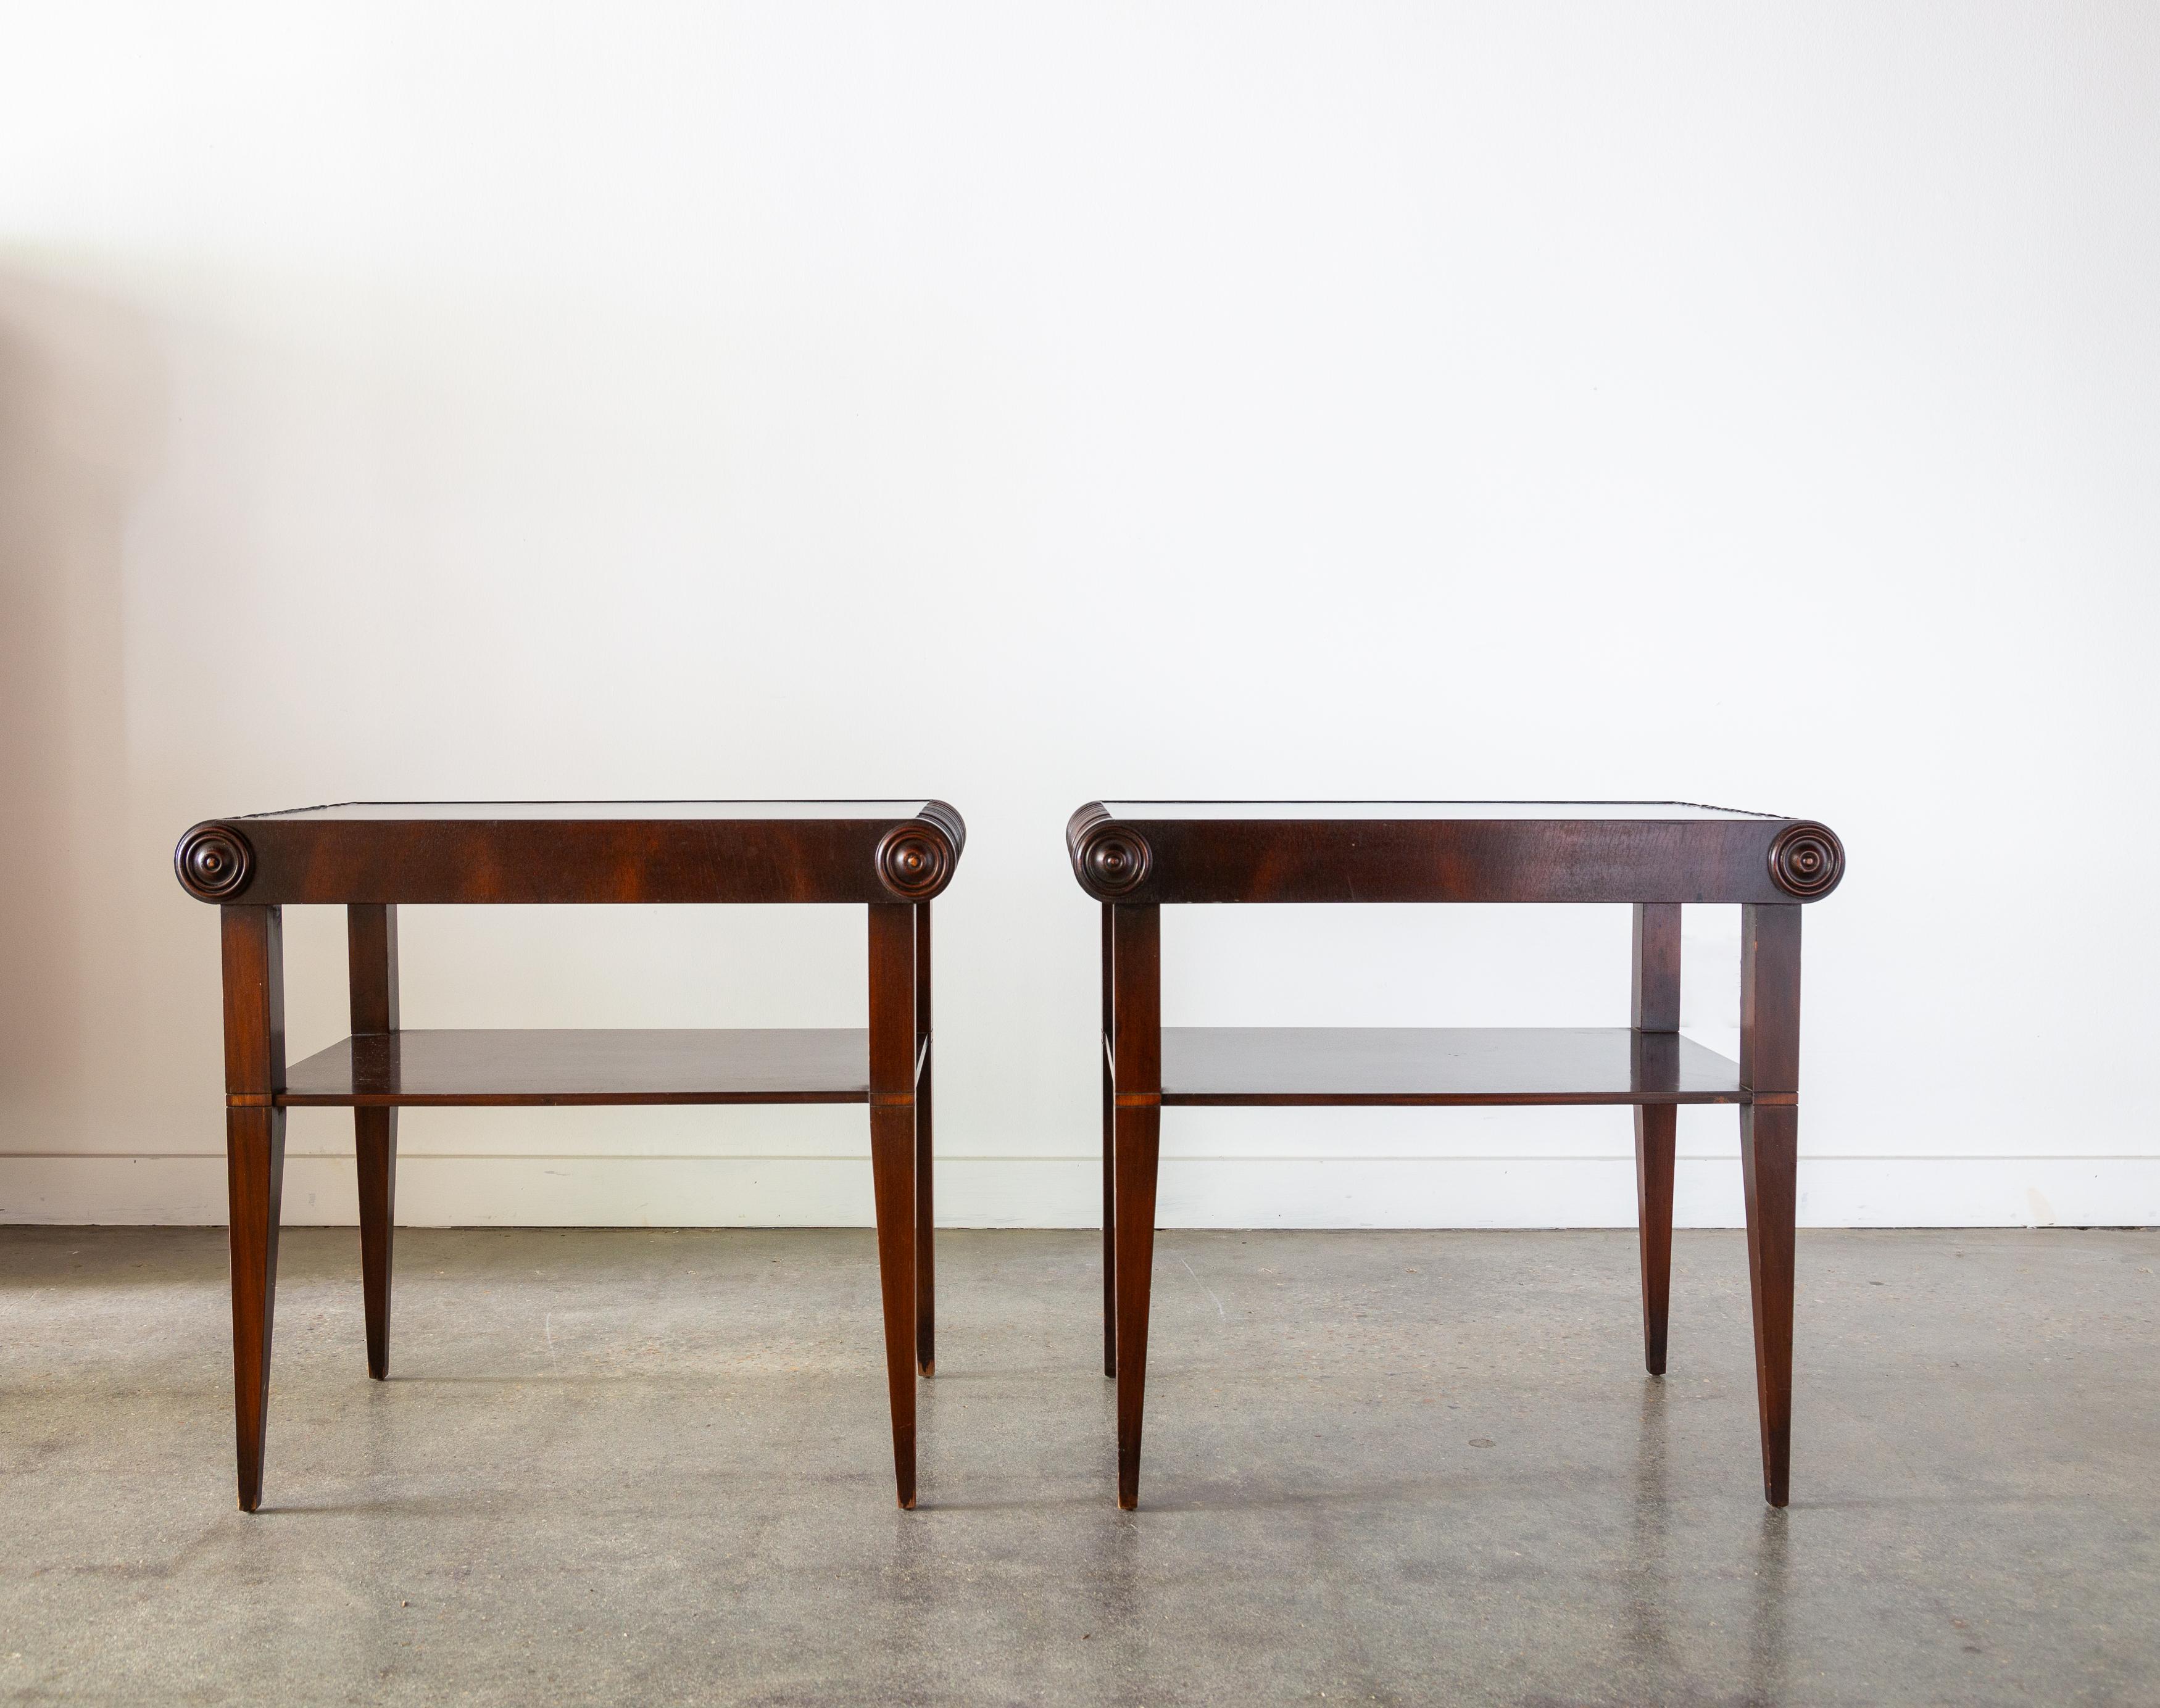 A pair of 1920s Art Deco Swedish end tables/nightstands with a lower shelf.  Mahogany frames with black leather tops. Intricate scrolled sides with tapered legs. 

Dimensions: 25.5”W x 16.5”D x 23.25”H

Condition: Good vintage condition. Shows a